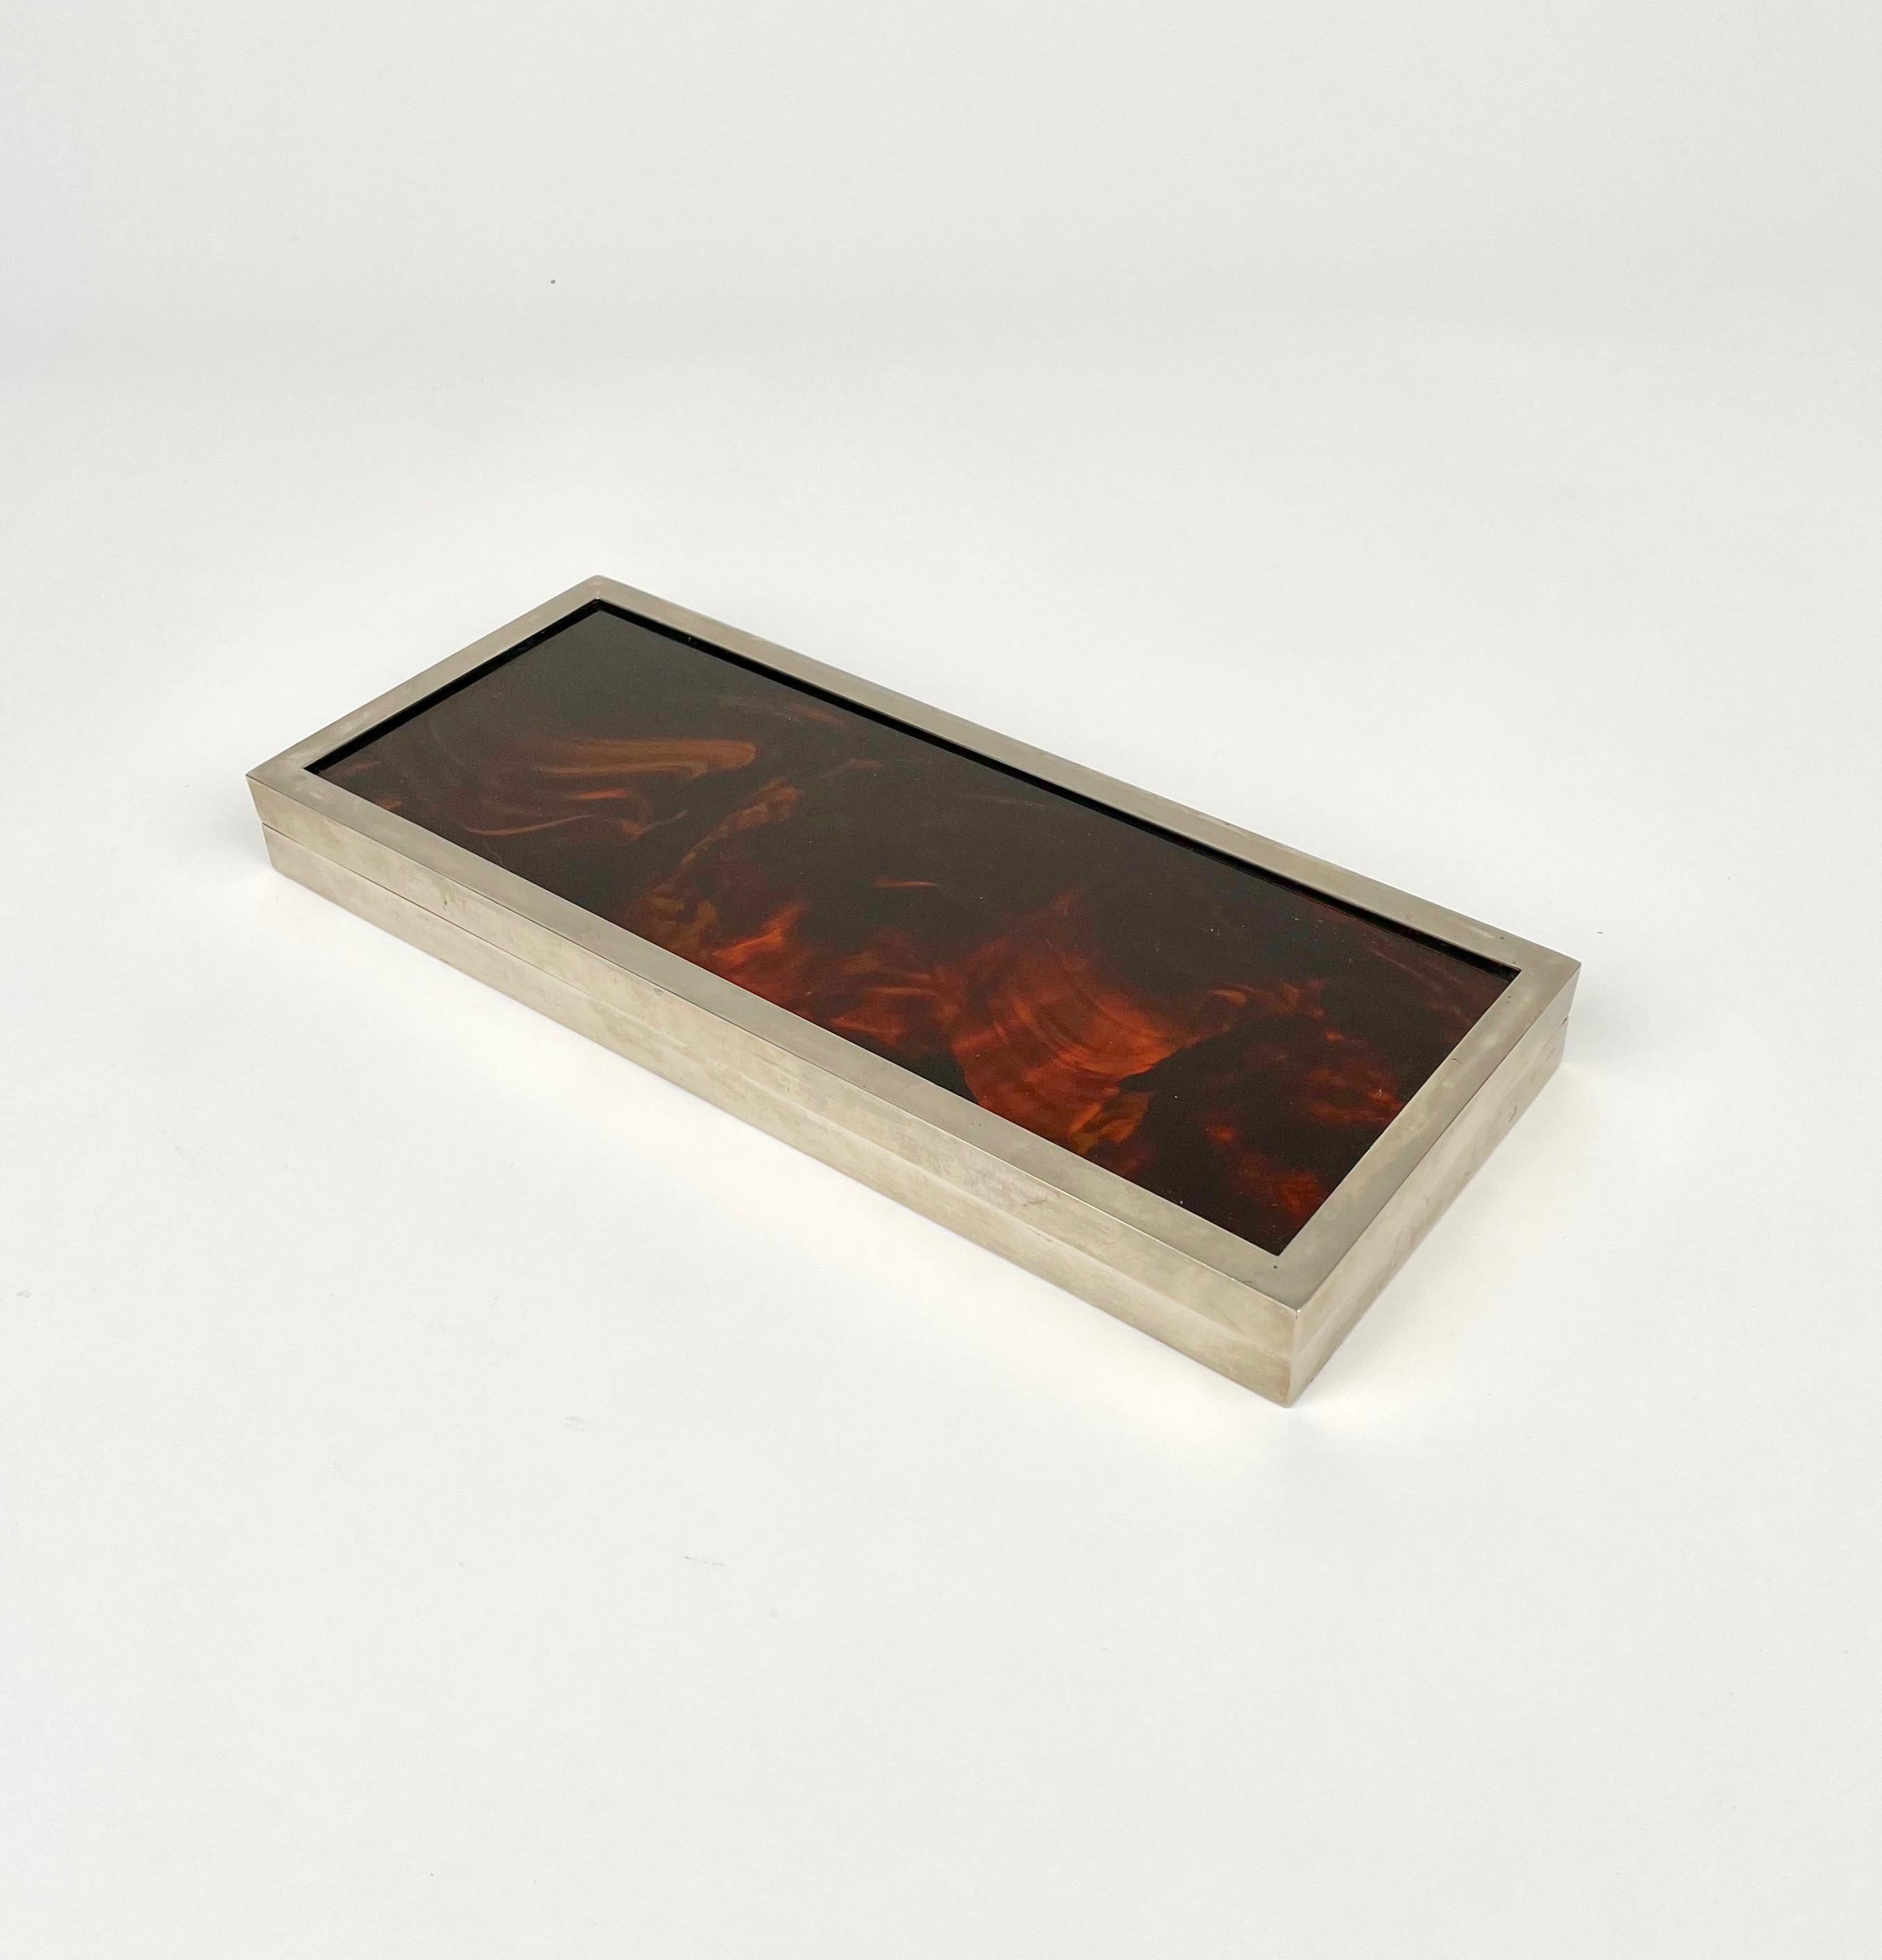 Rectangular box in tortoiseshell-effect lucite with chrome borders in Christian Dior style. 

Made in Italy in the 1970s.